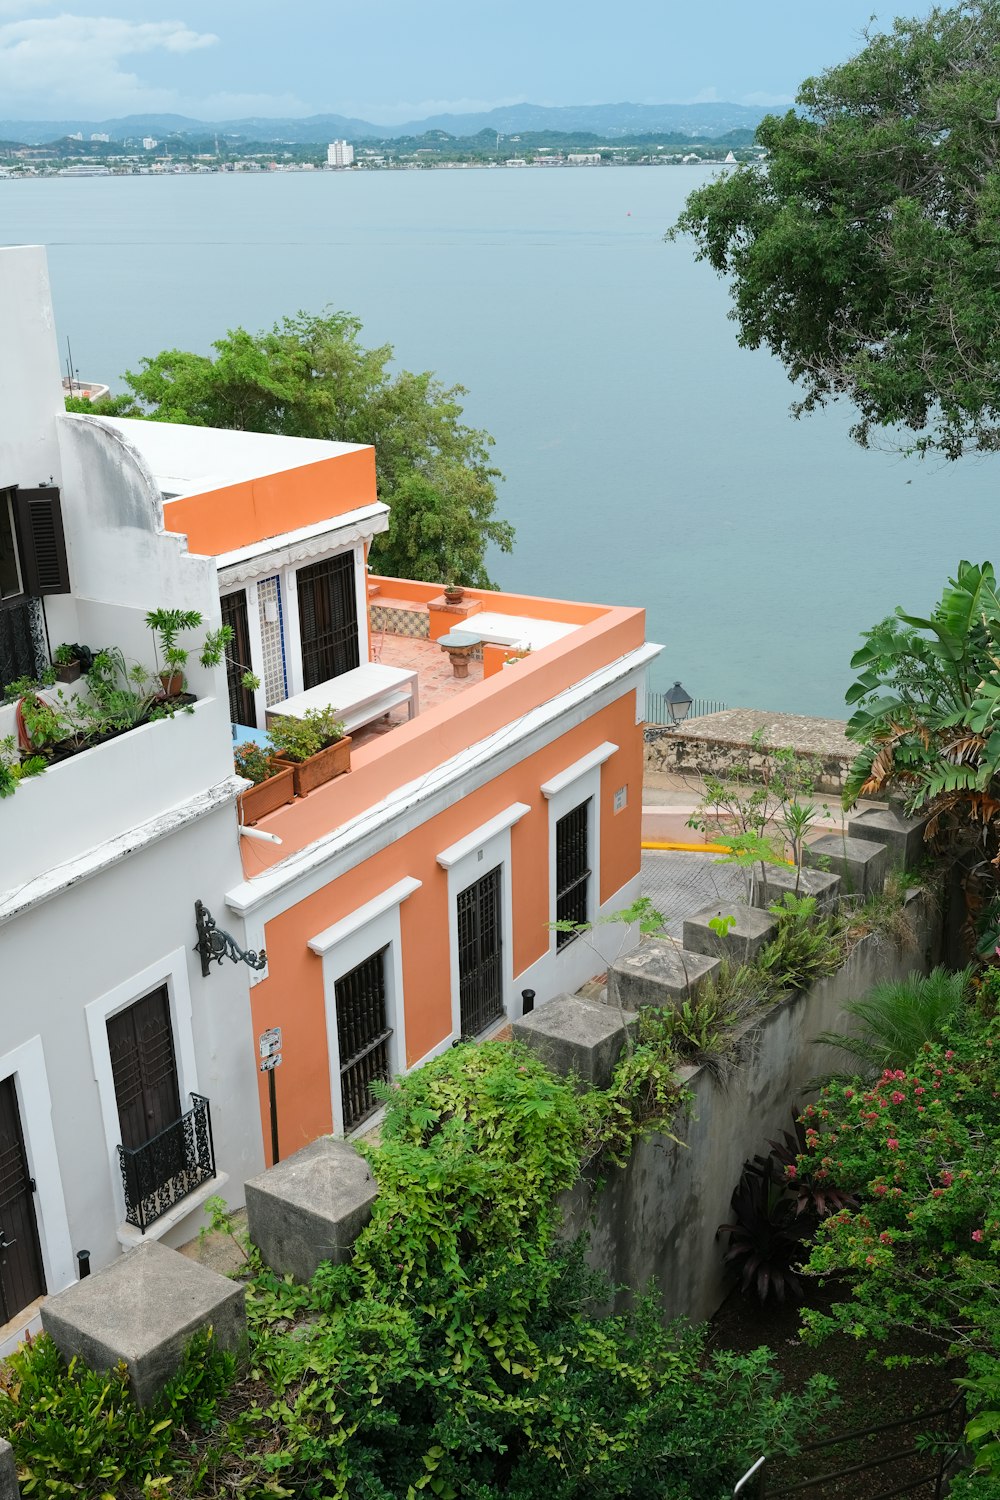 an orange and white house next to a body of water